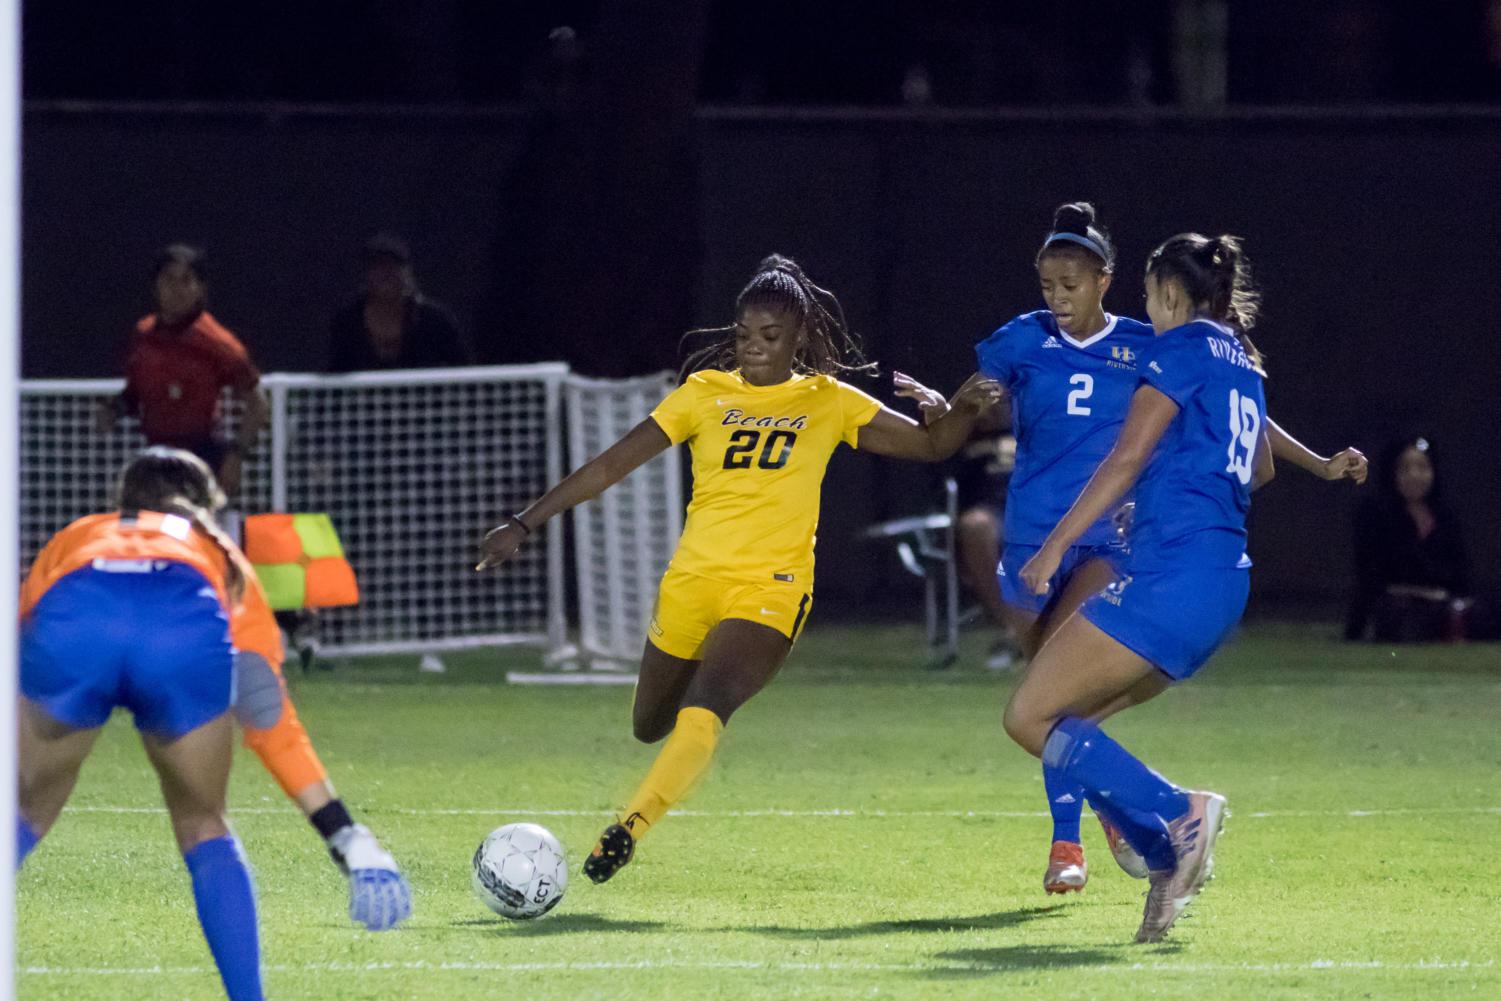 Long Beach State's senior Tori Bolden shoots the ball in Sunday's match against UC Riverside at George Allen Field.